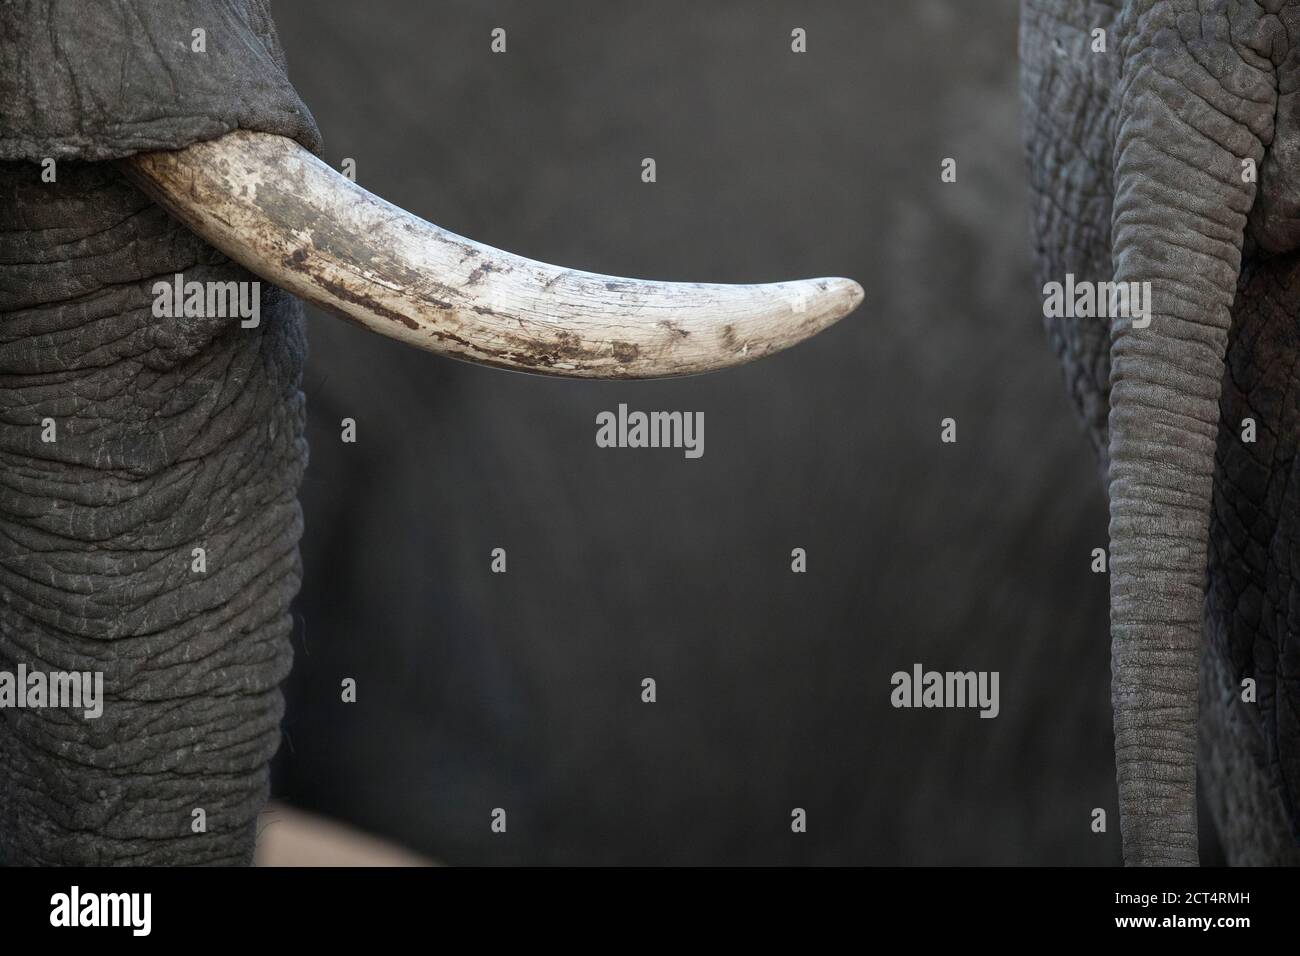 Close up details of an elephants tusk. Stock Photo